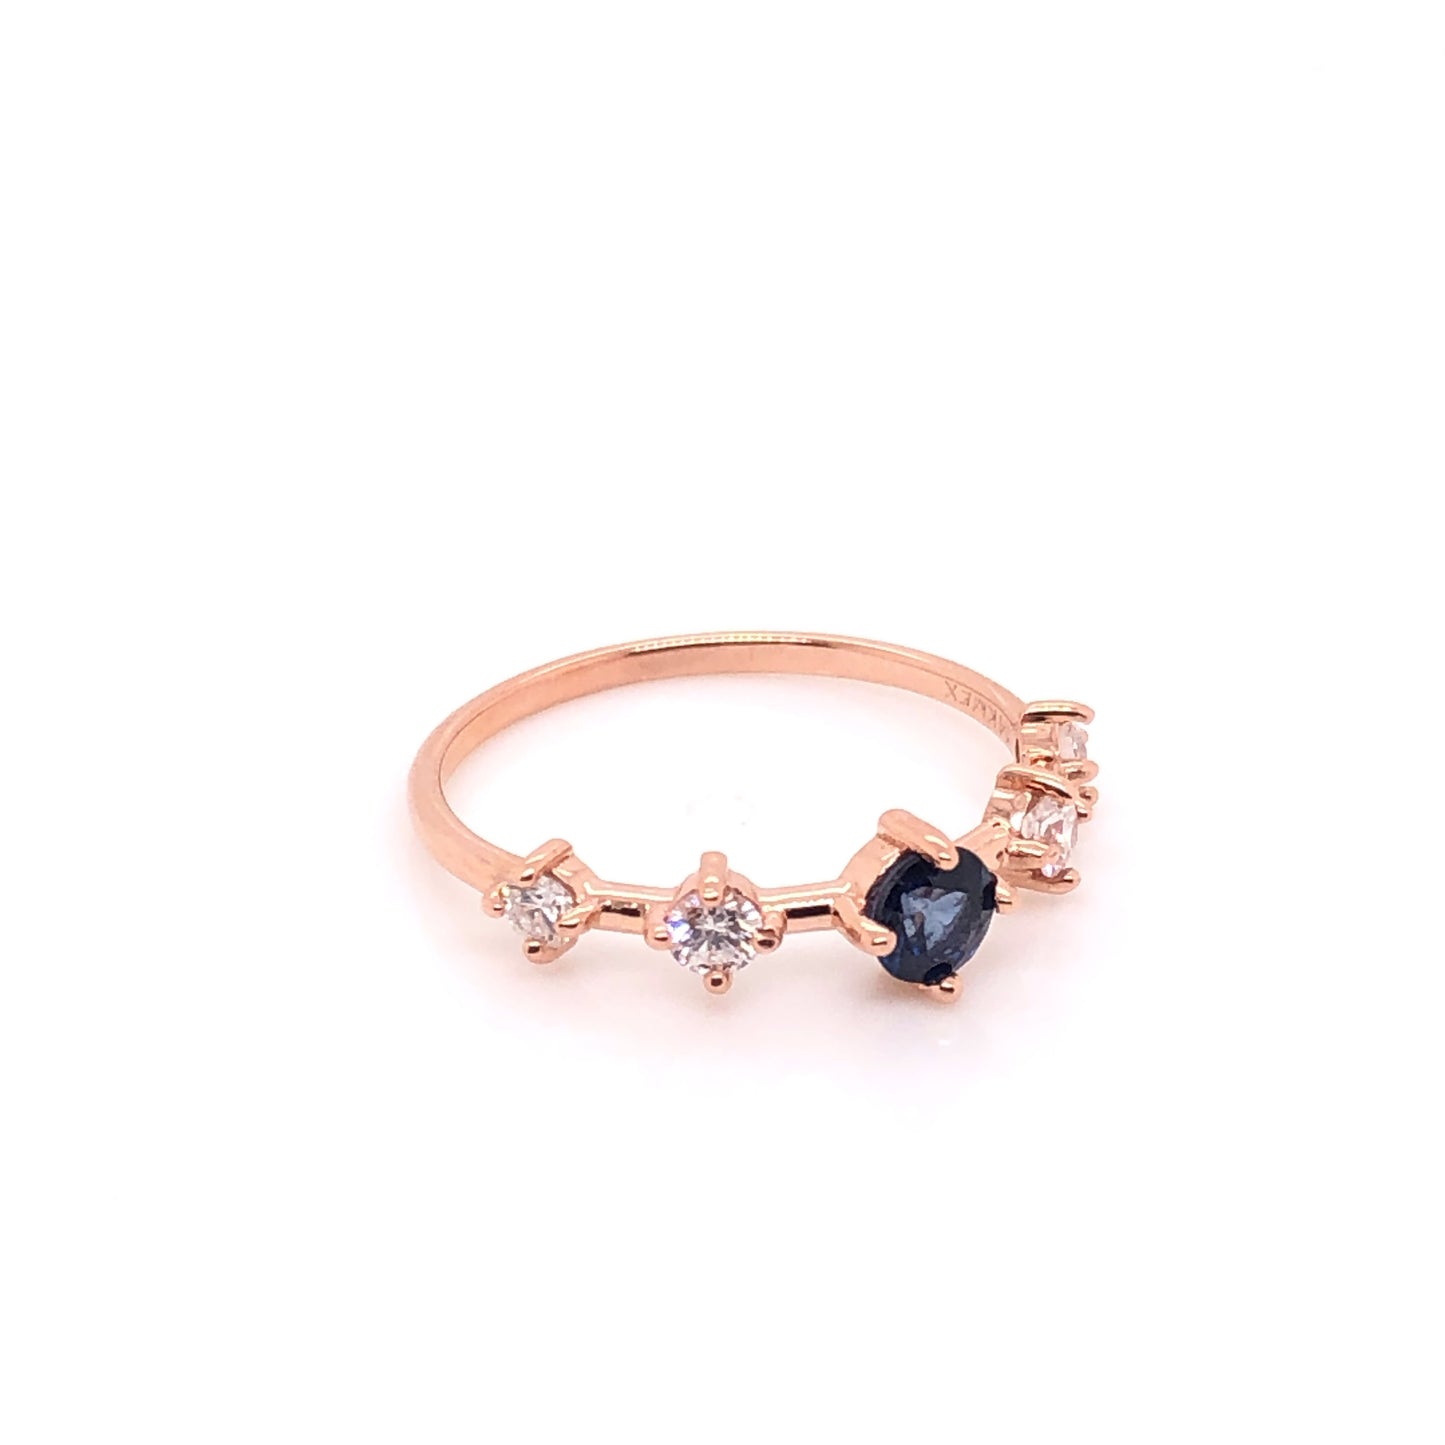 Sapphire Ring with Spaced Diamonds (single piece)